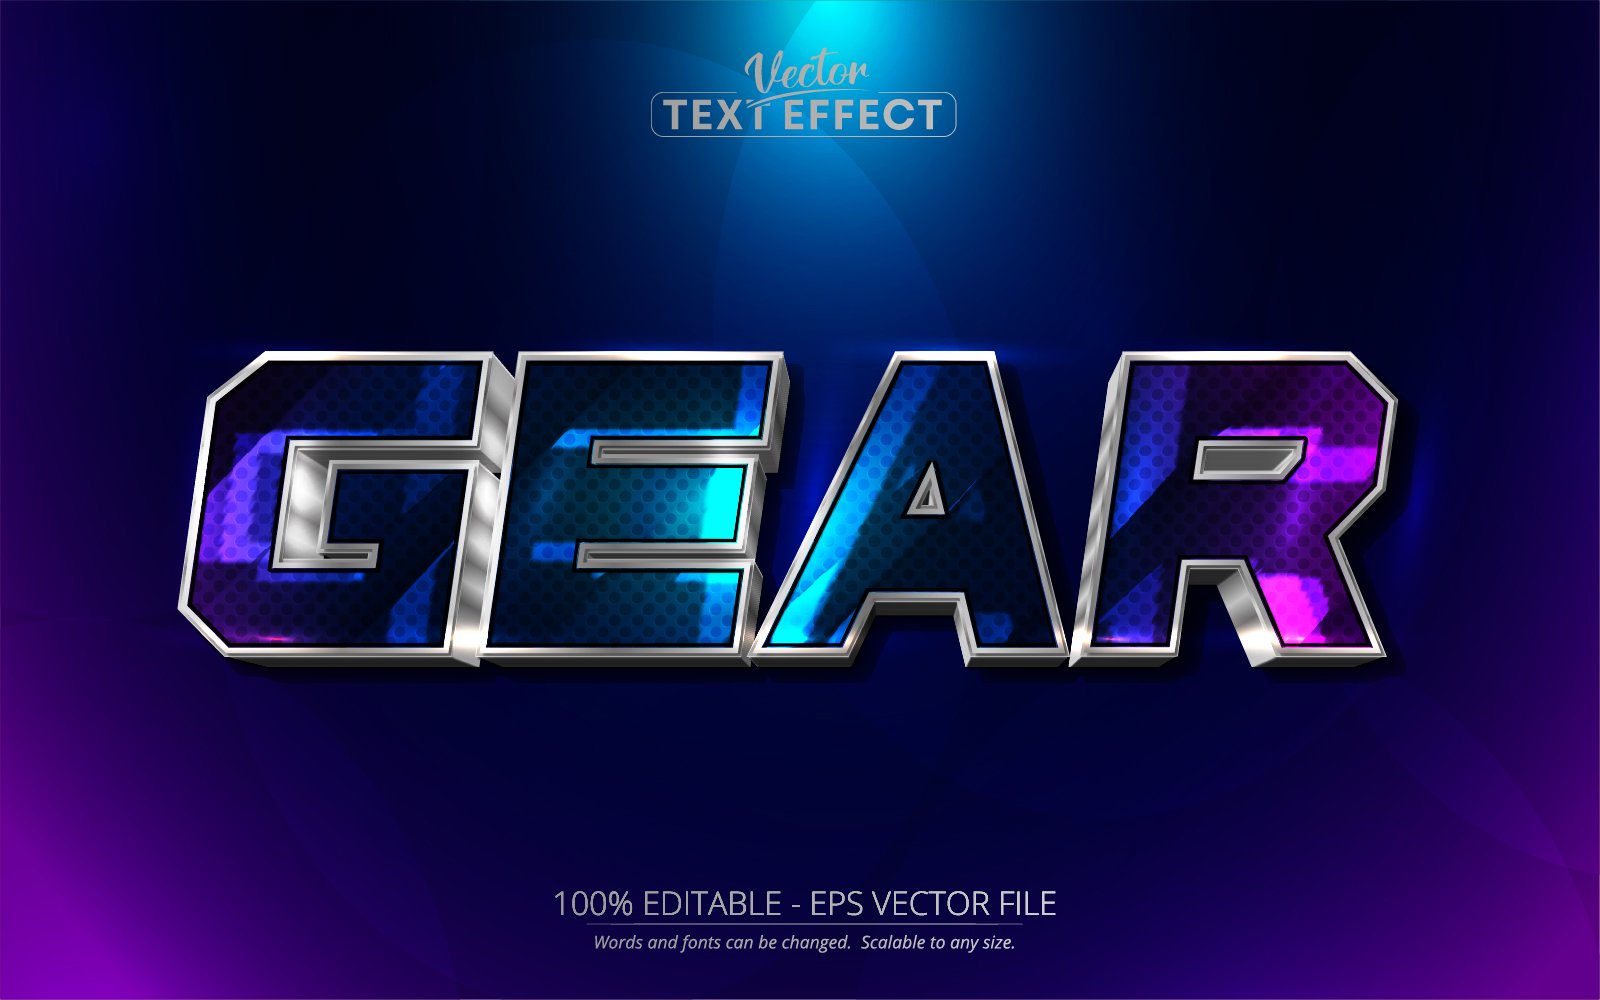 Gear - Editable Text Effect, Colorful Metallic Shiny Silver Text Style, Graphics Illustration